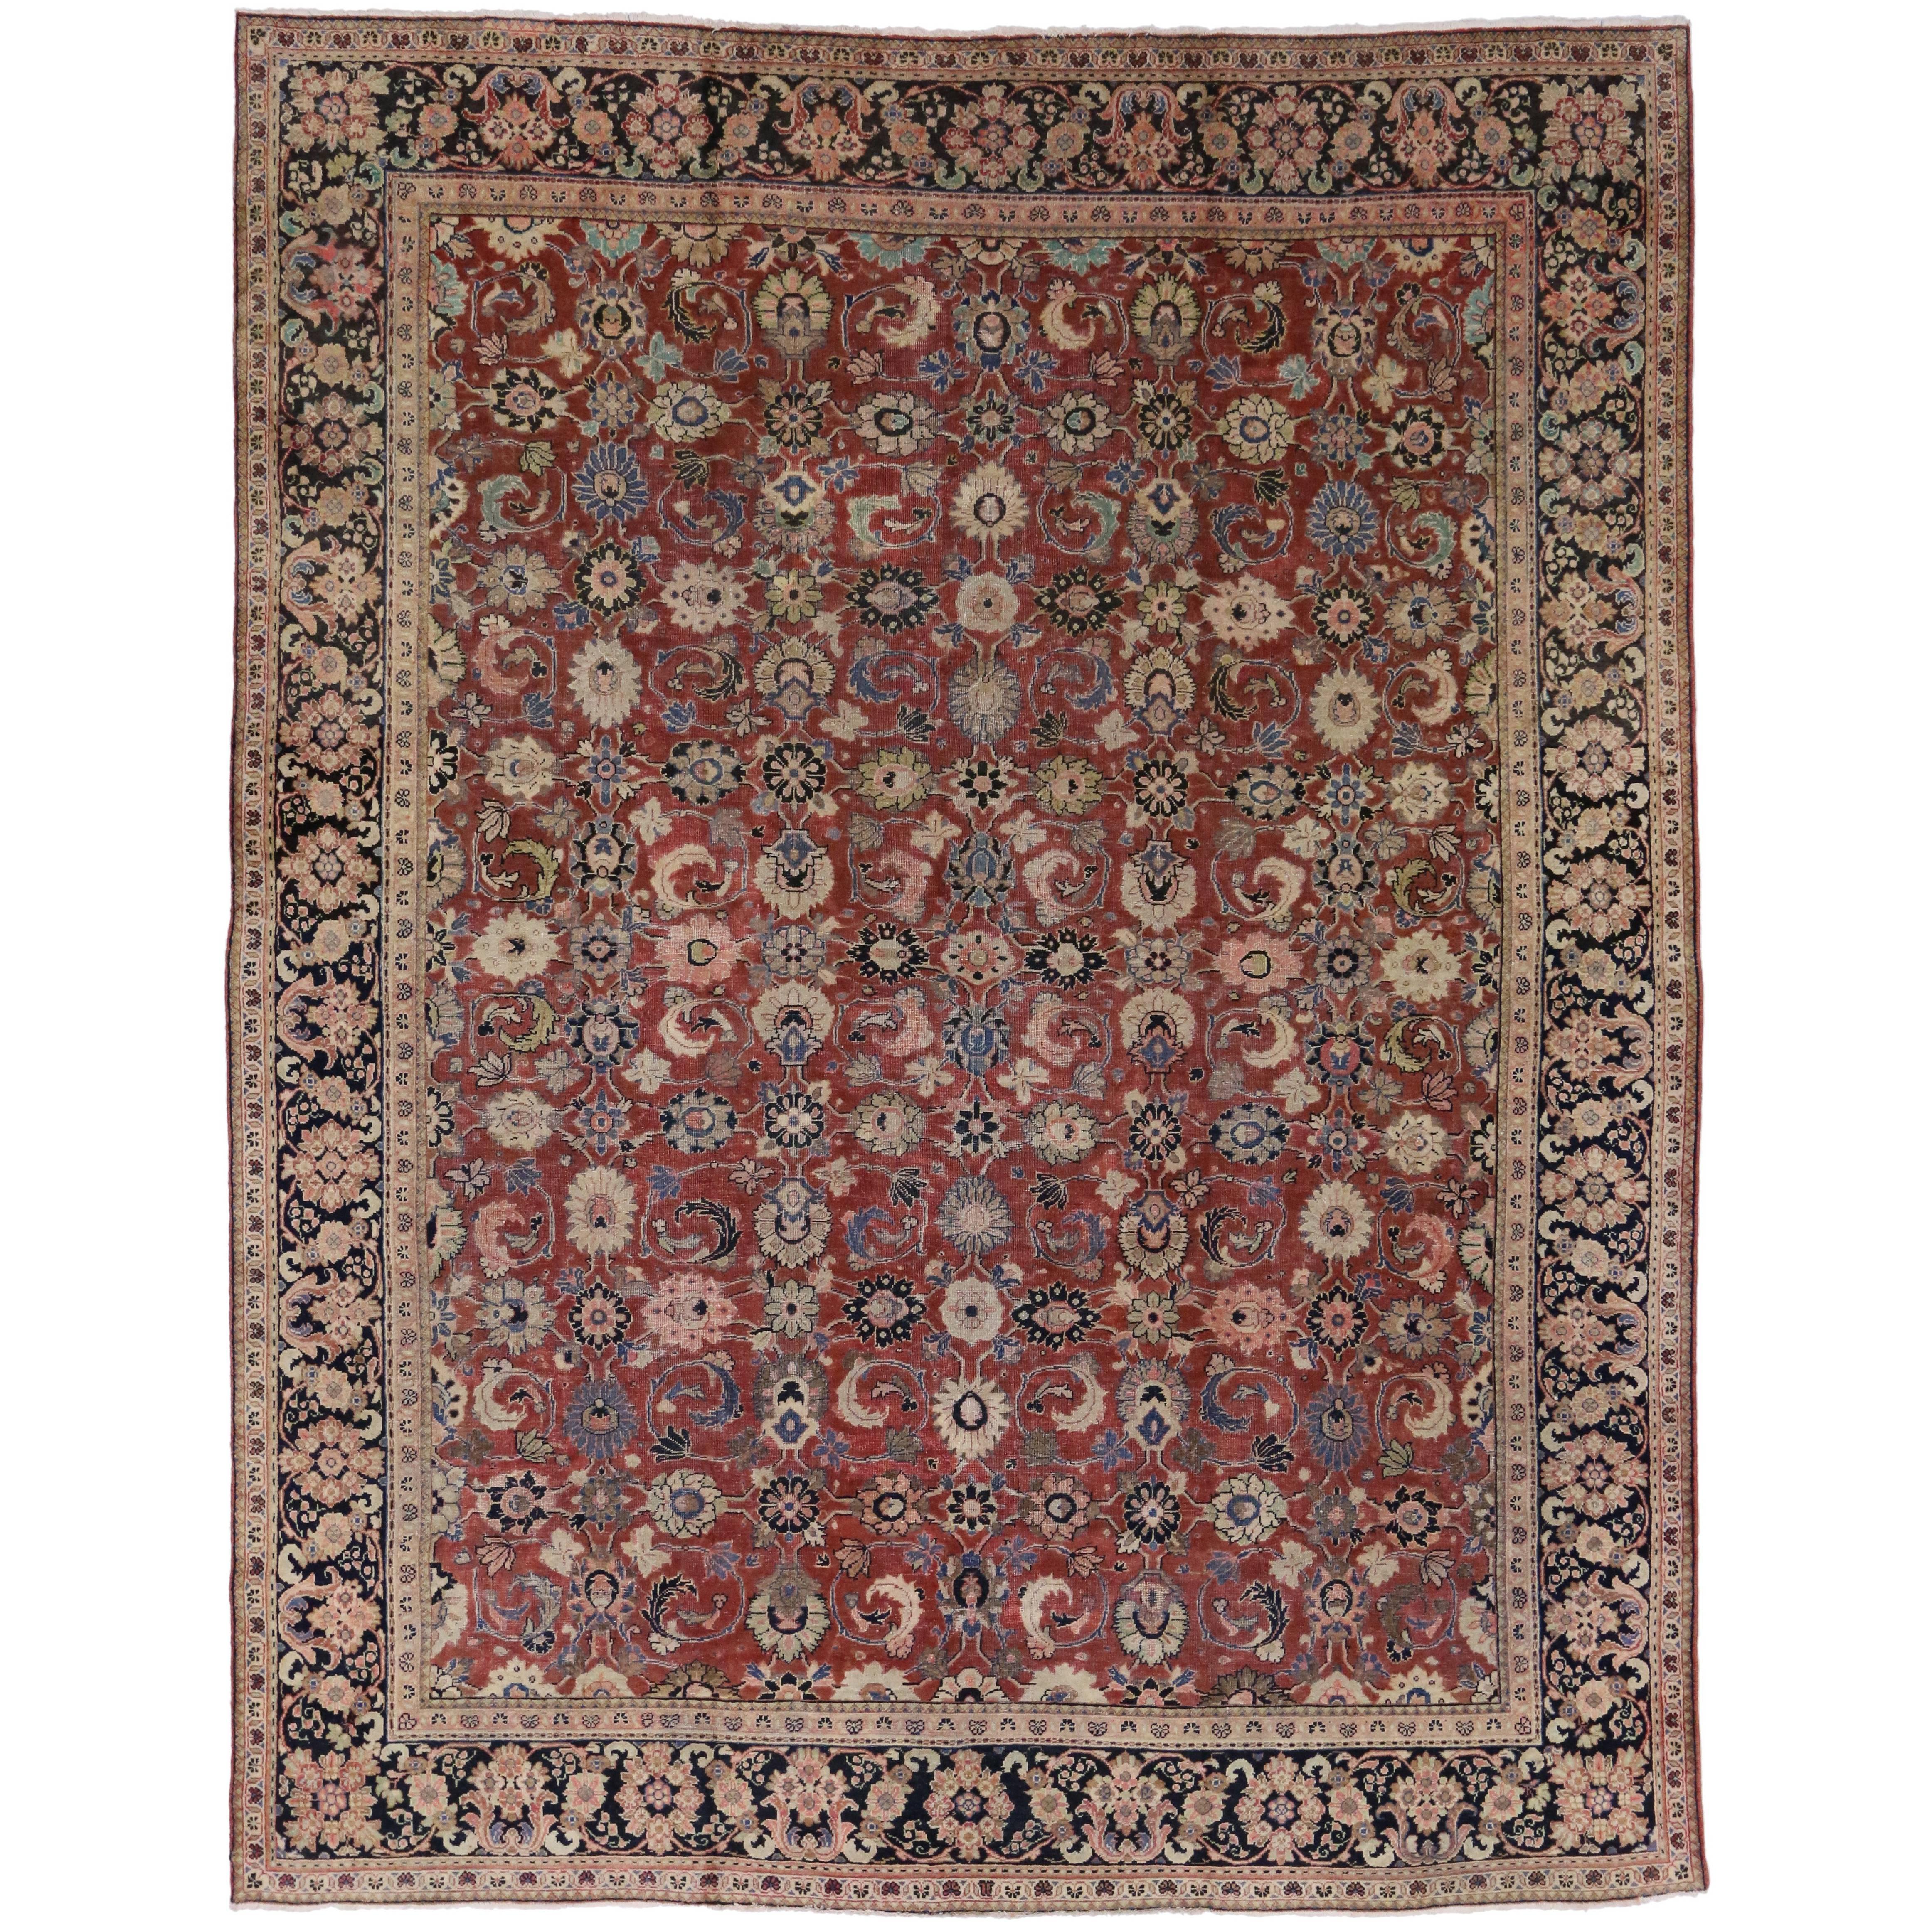 Vintage Persian Mahal Area Rug with Traditional Colonial and Federal Style